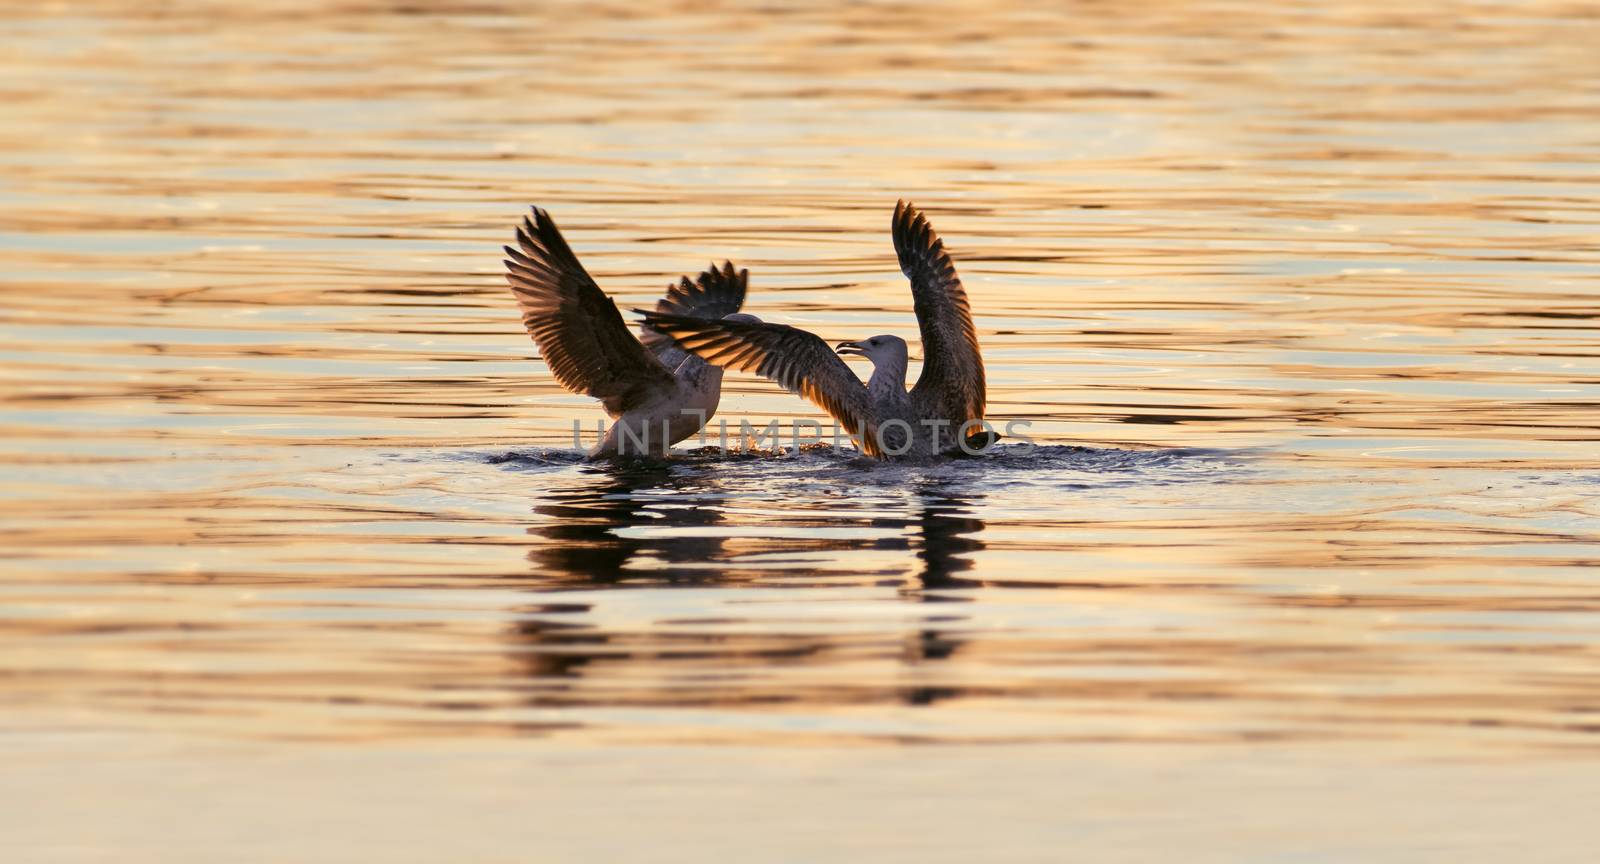 Seagulls fighting over a fish in the mediterranean sea at sunset by worledit